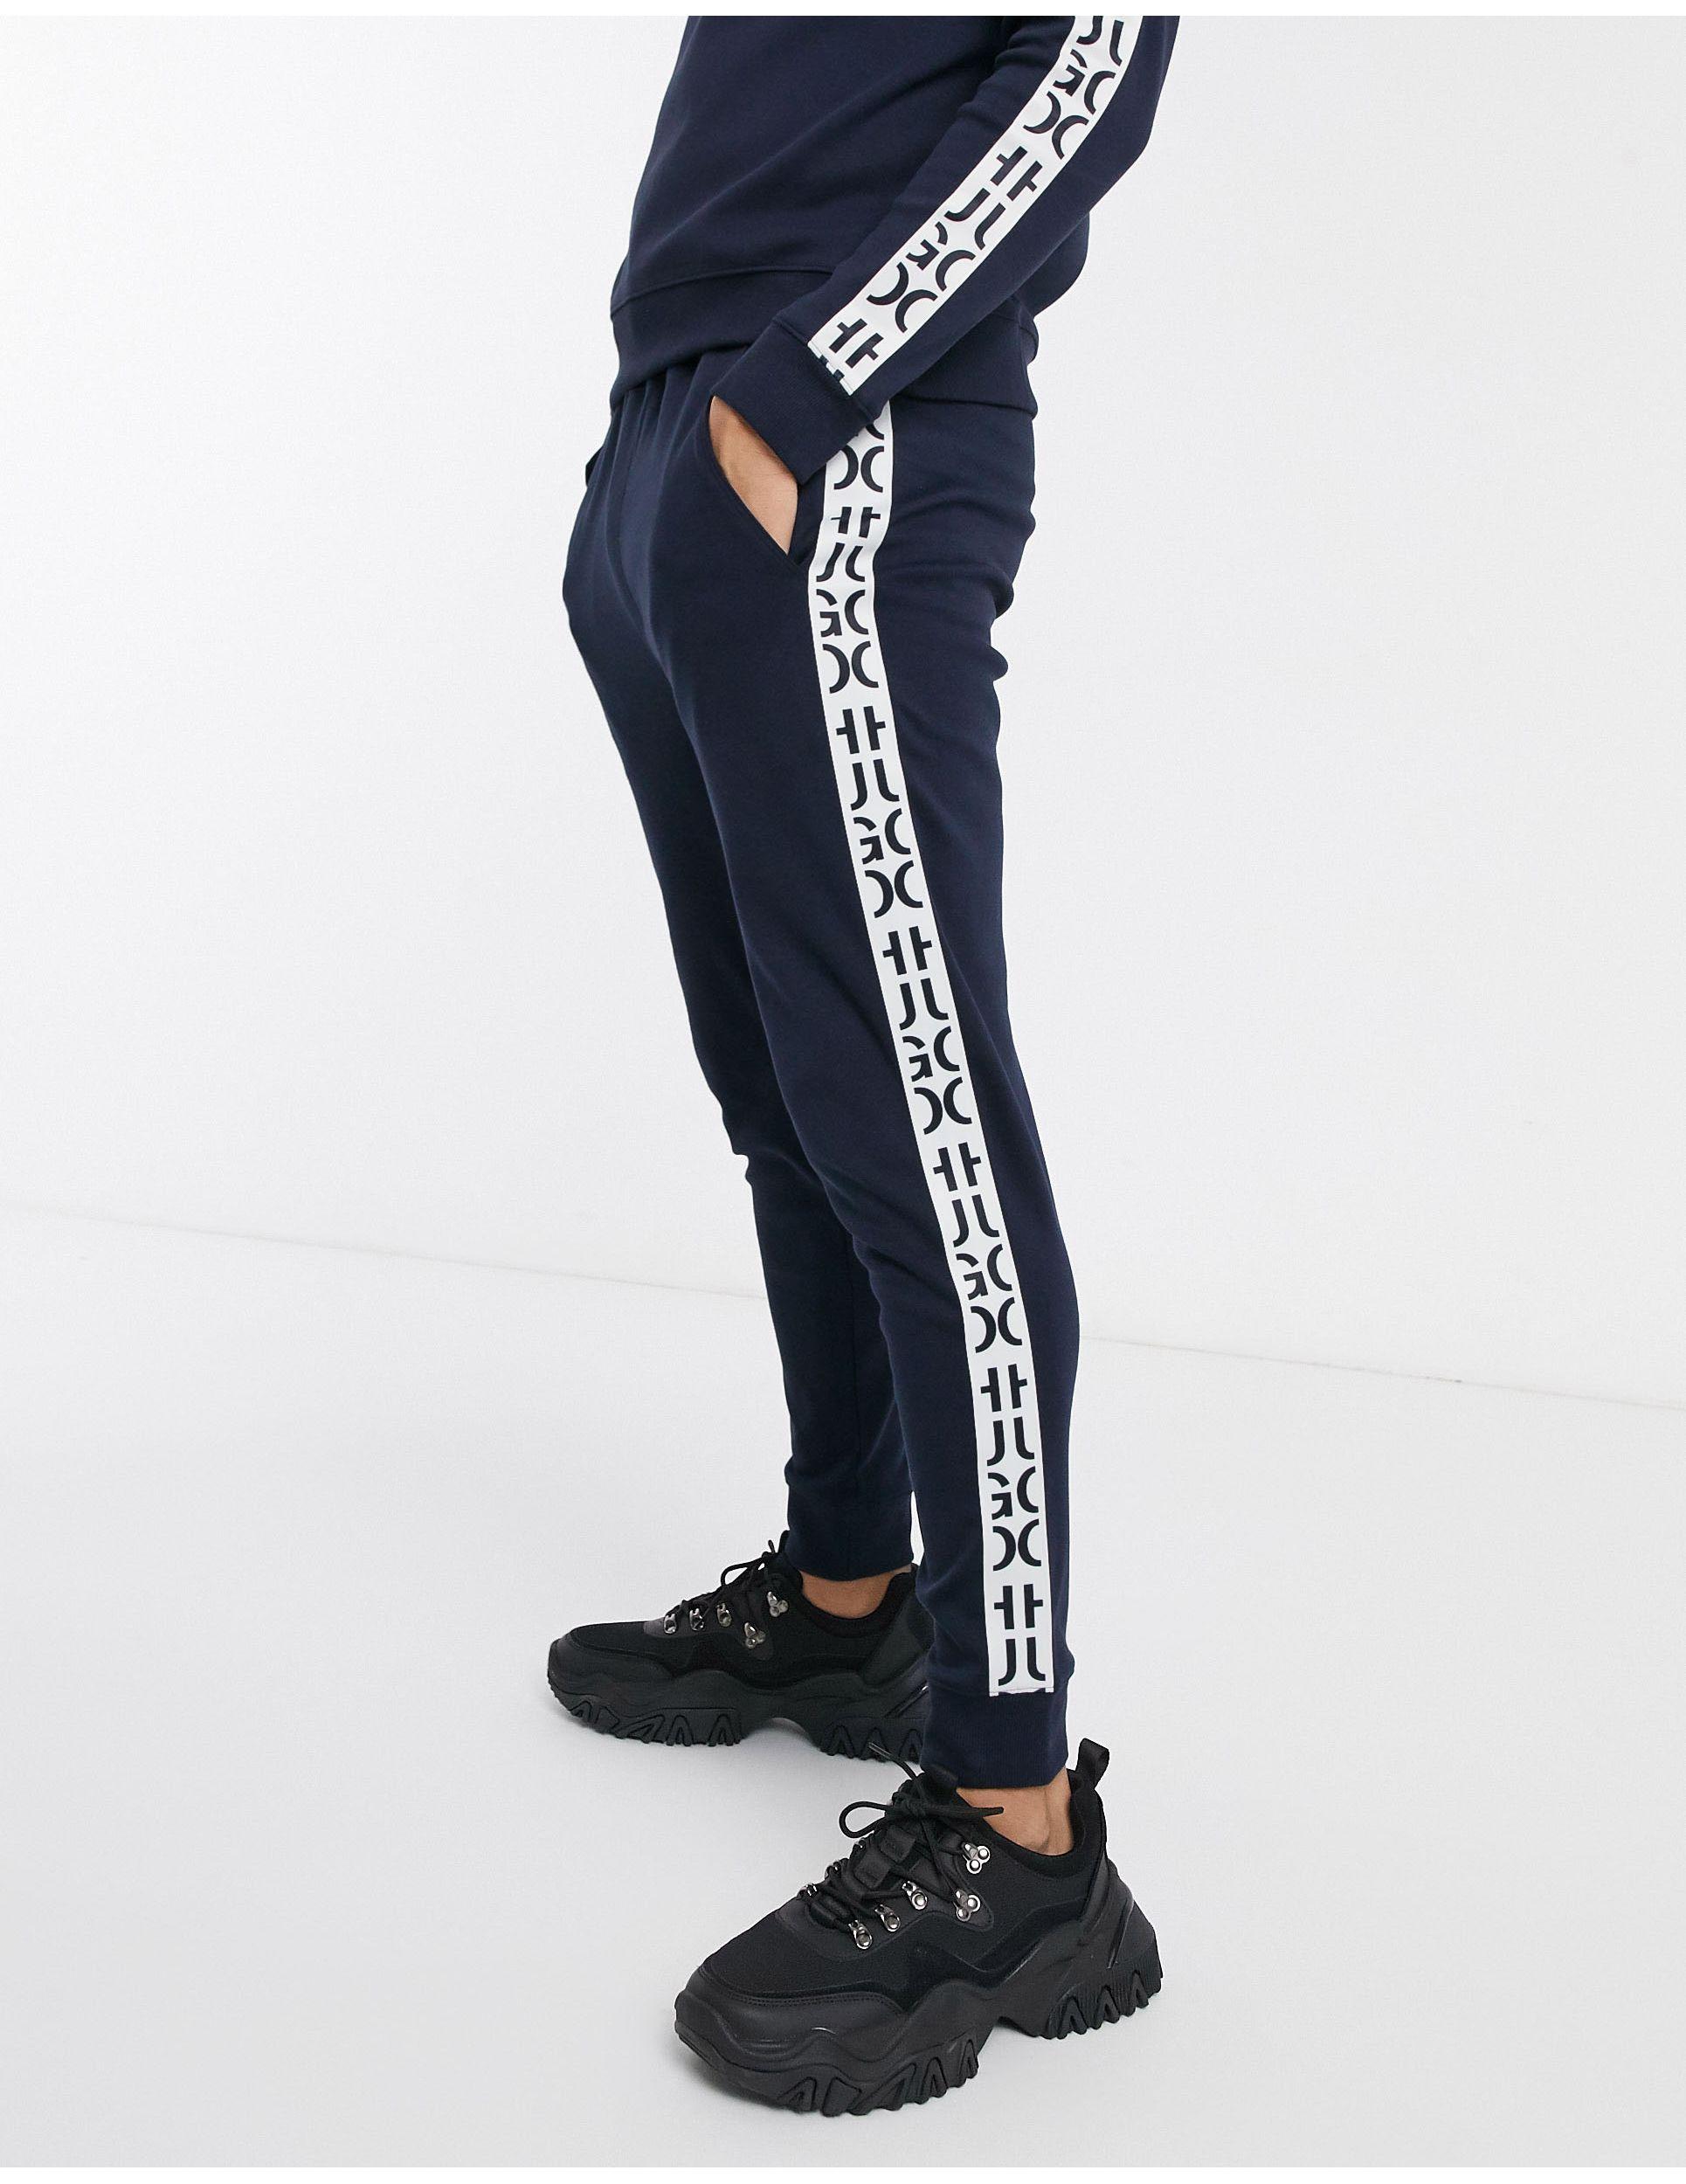 HUGO Cotton Daky Taped joggers in Navy (Blue) for Men - Lyst